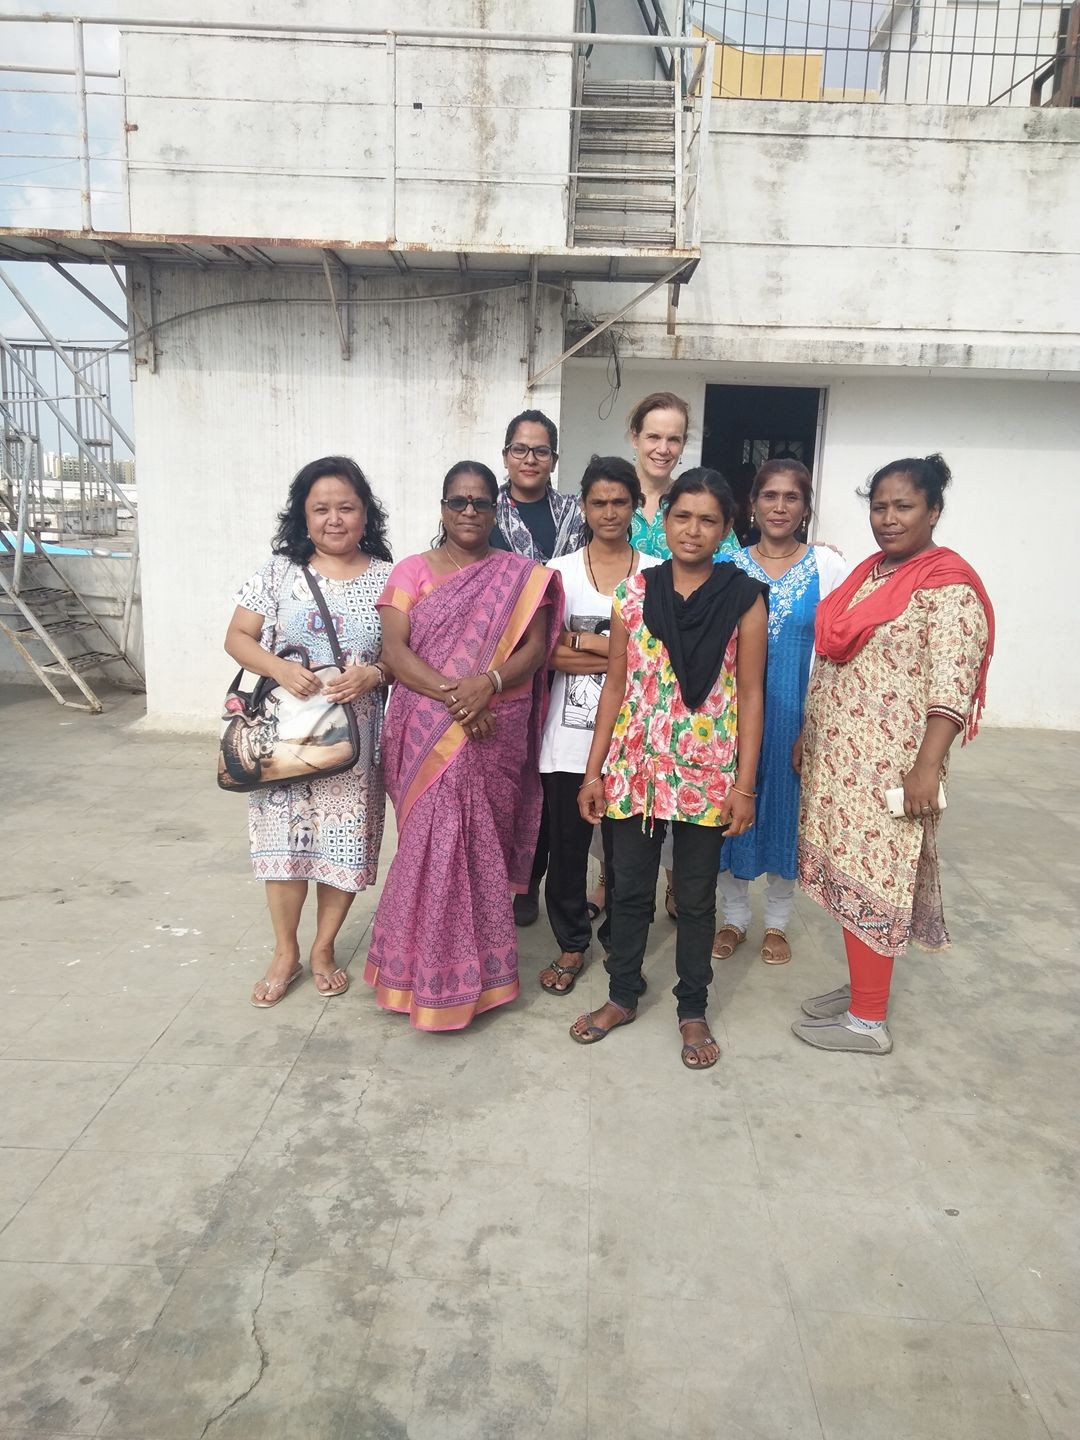 Women from the WINGS team standing in a group outside in India